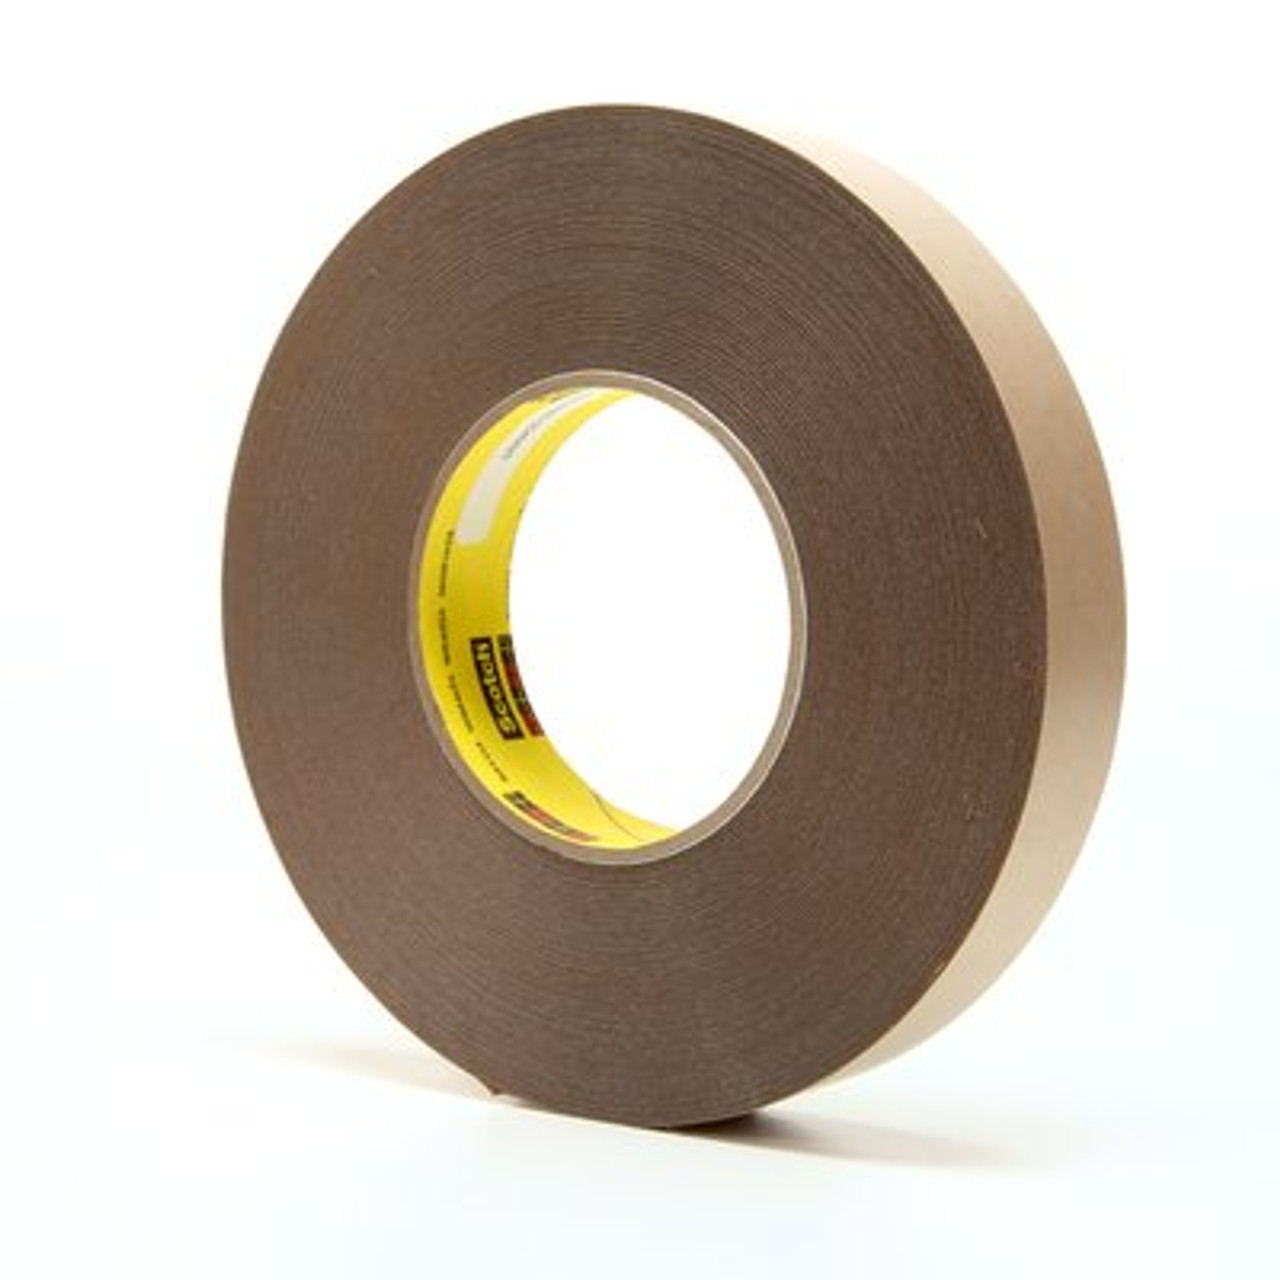 3M™ Removable Repositionable Tape 9425, Clear, 1 in x 72 yd, 5.8 mil